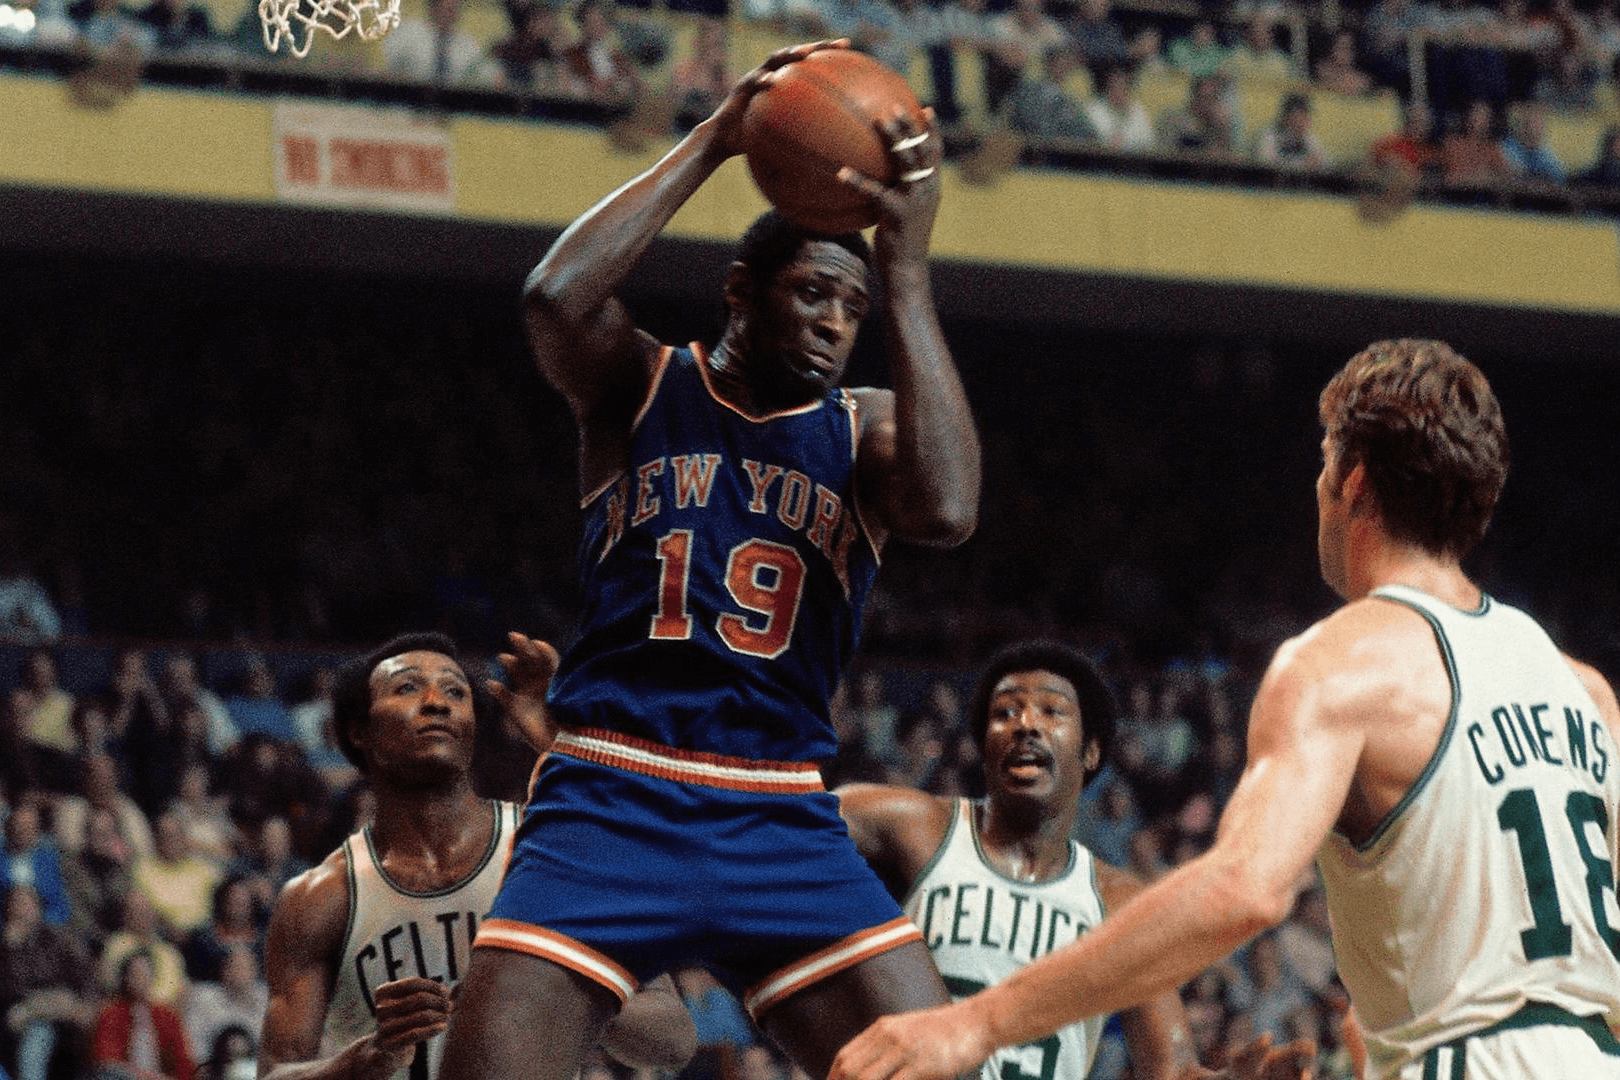 Top 10 Most Valuable Knicks Basketball Cards of All Time